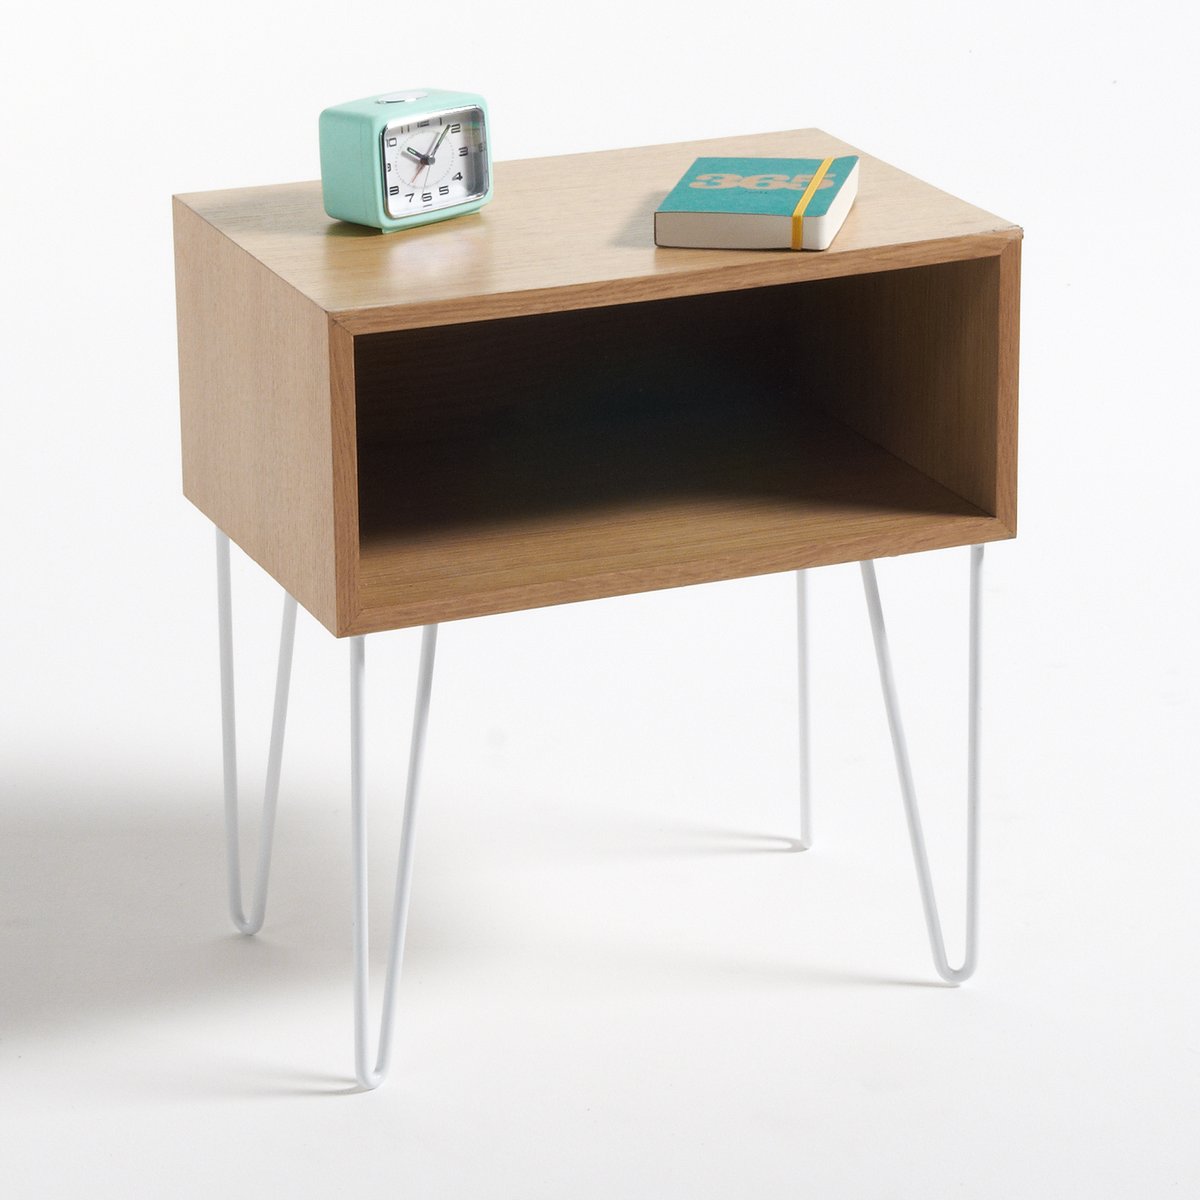 Image of Adza Bedside Table